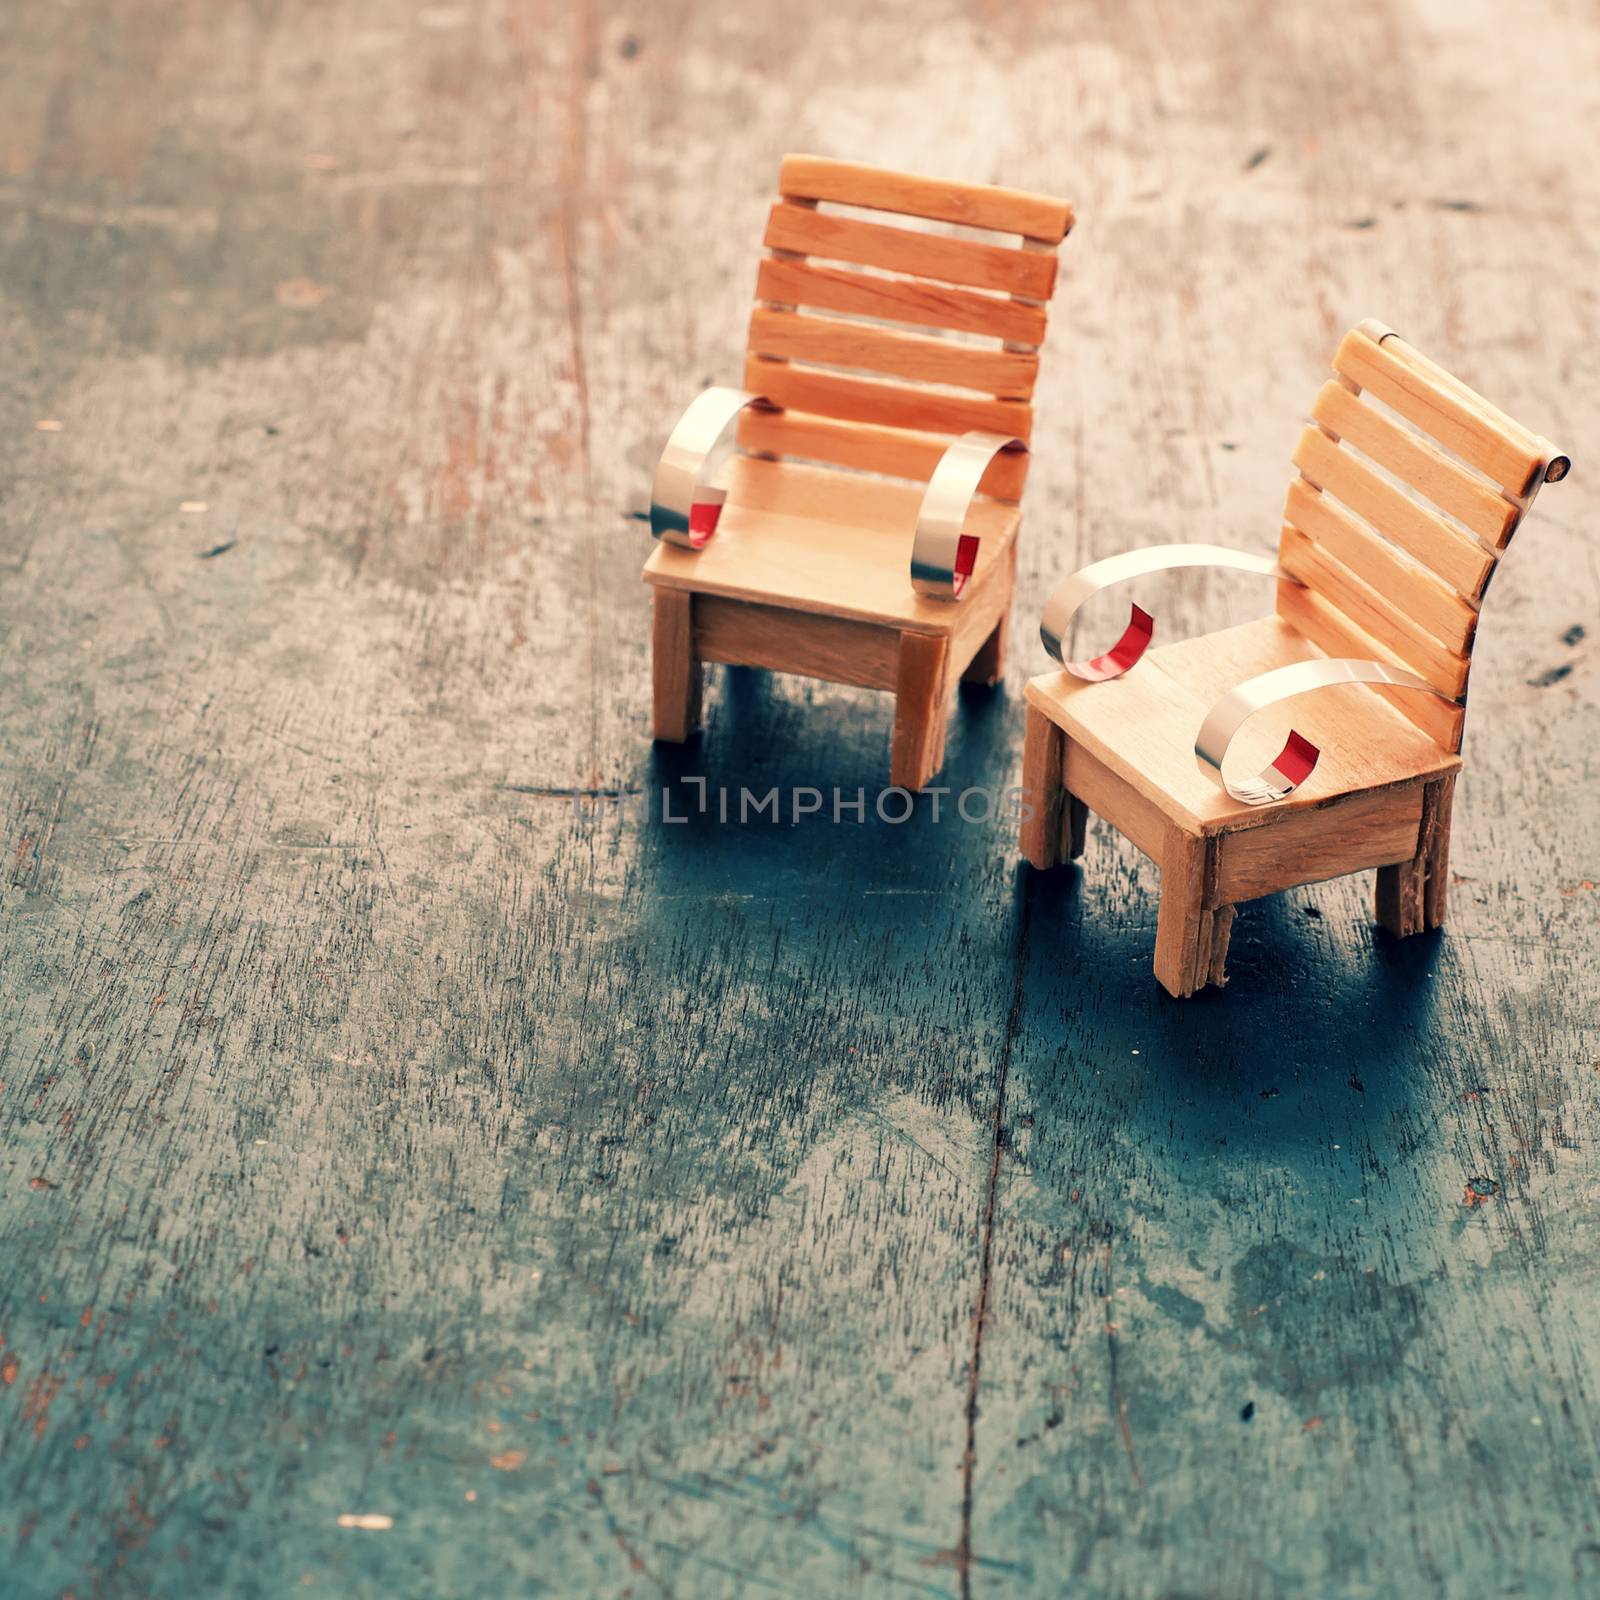 mini furniture, cute small chair by xuanhuongho